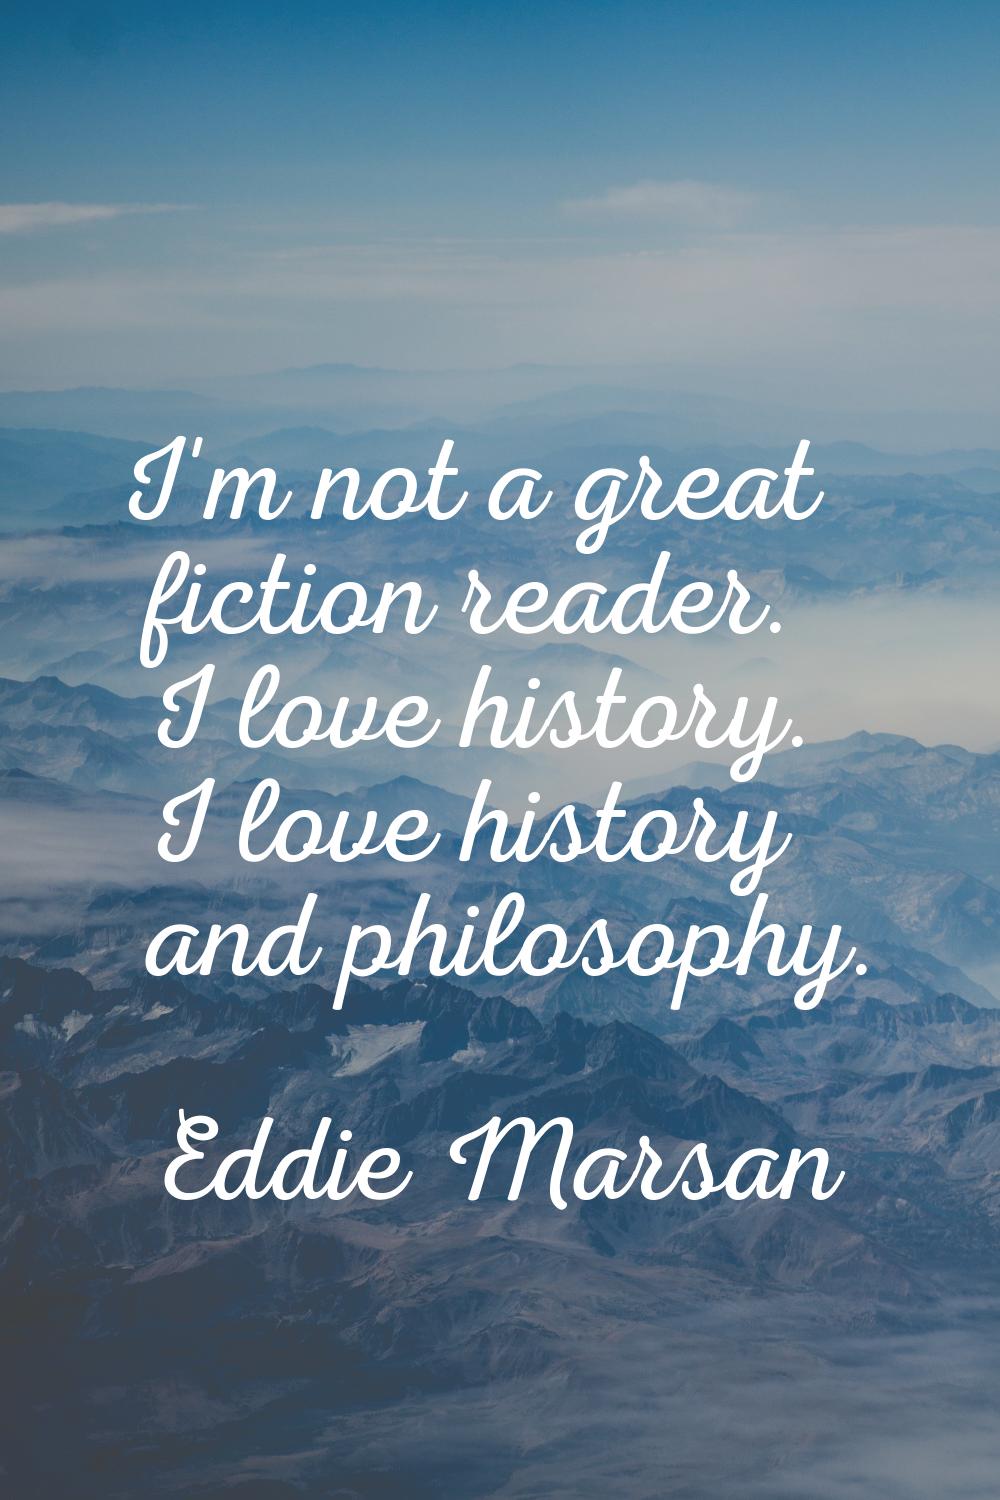 I'm not a great fiction reader. I love history. I love history and philosophy.